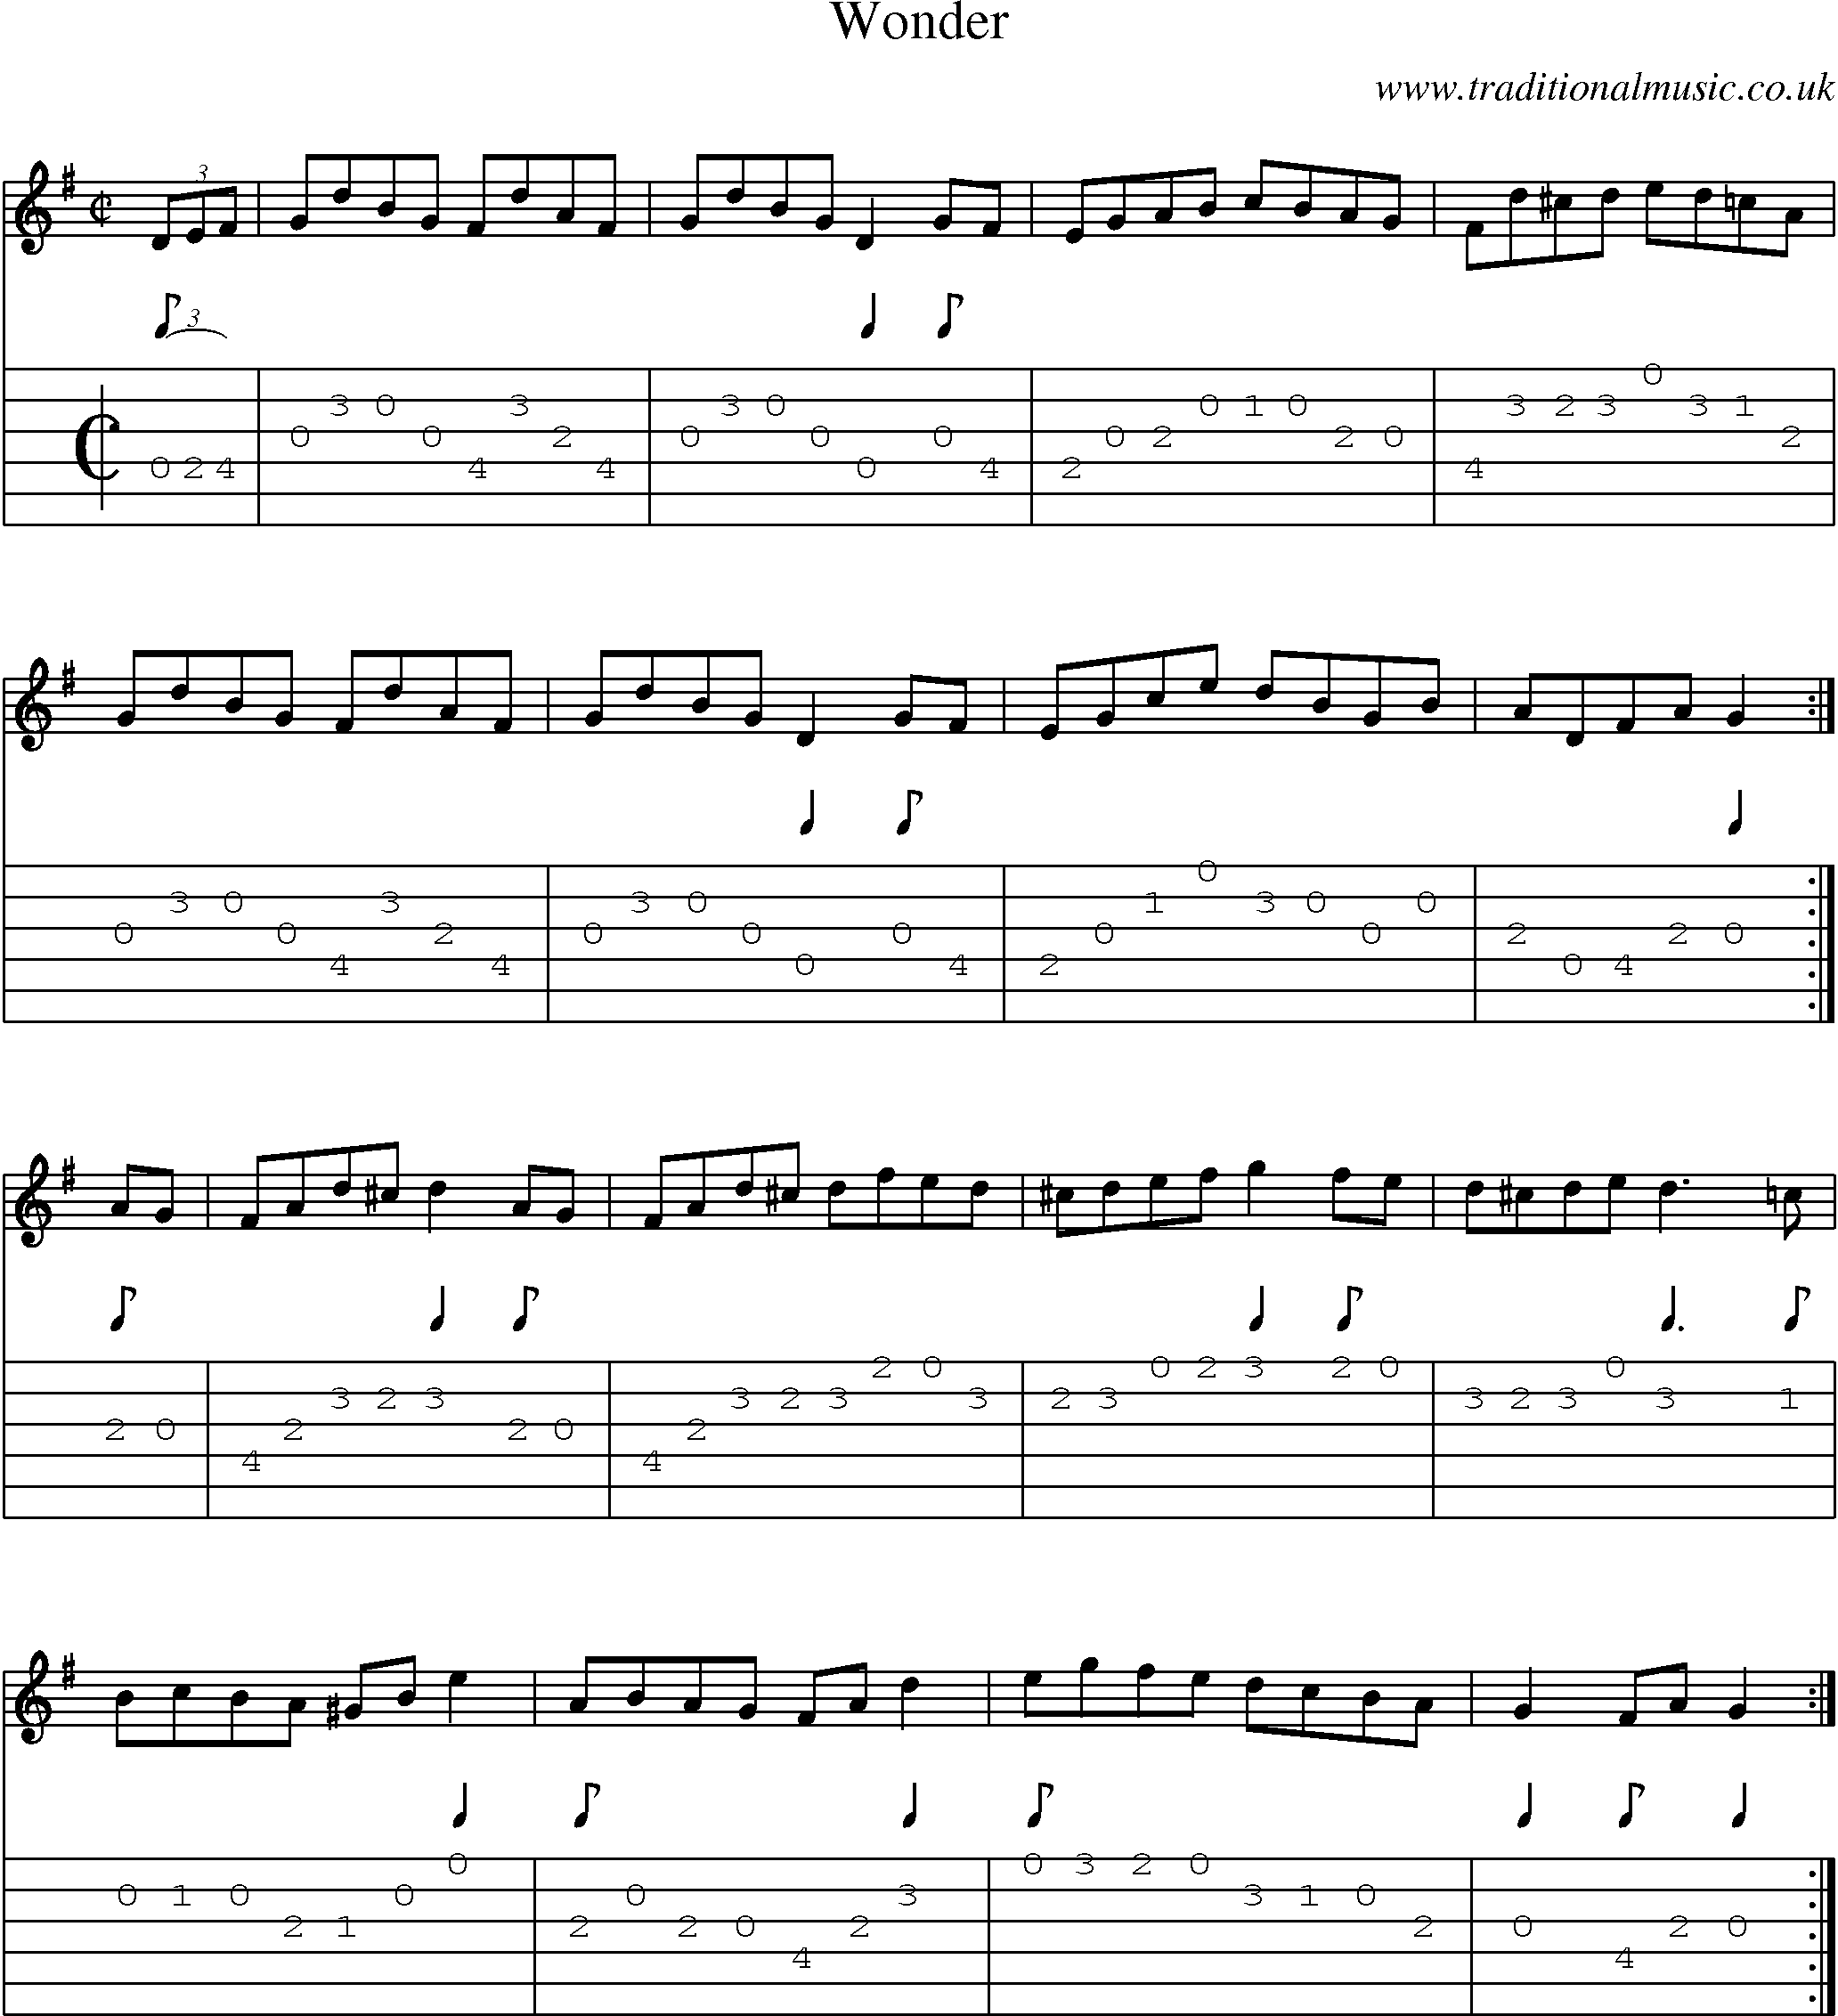 Music Score and Guitar Tabs for Wonder